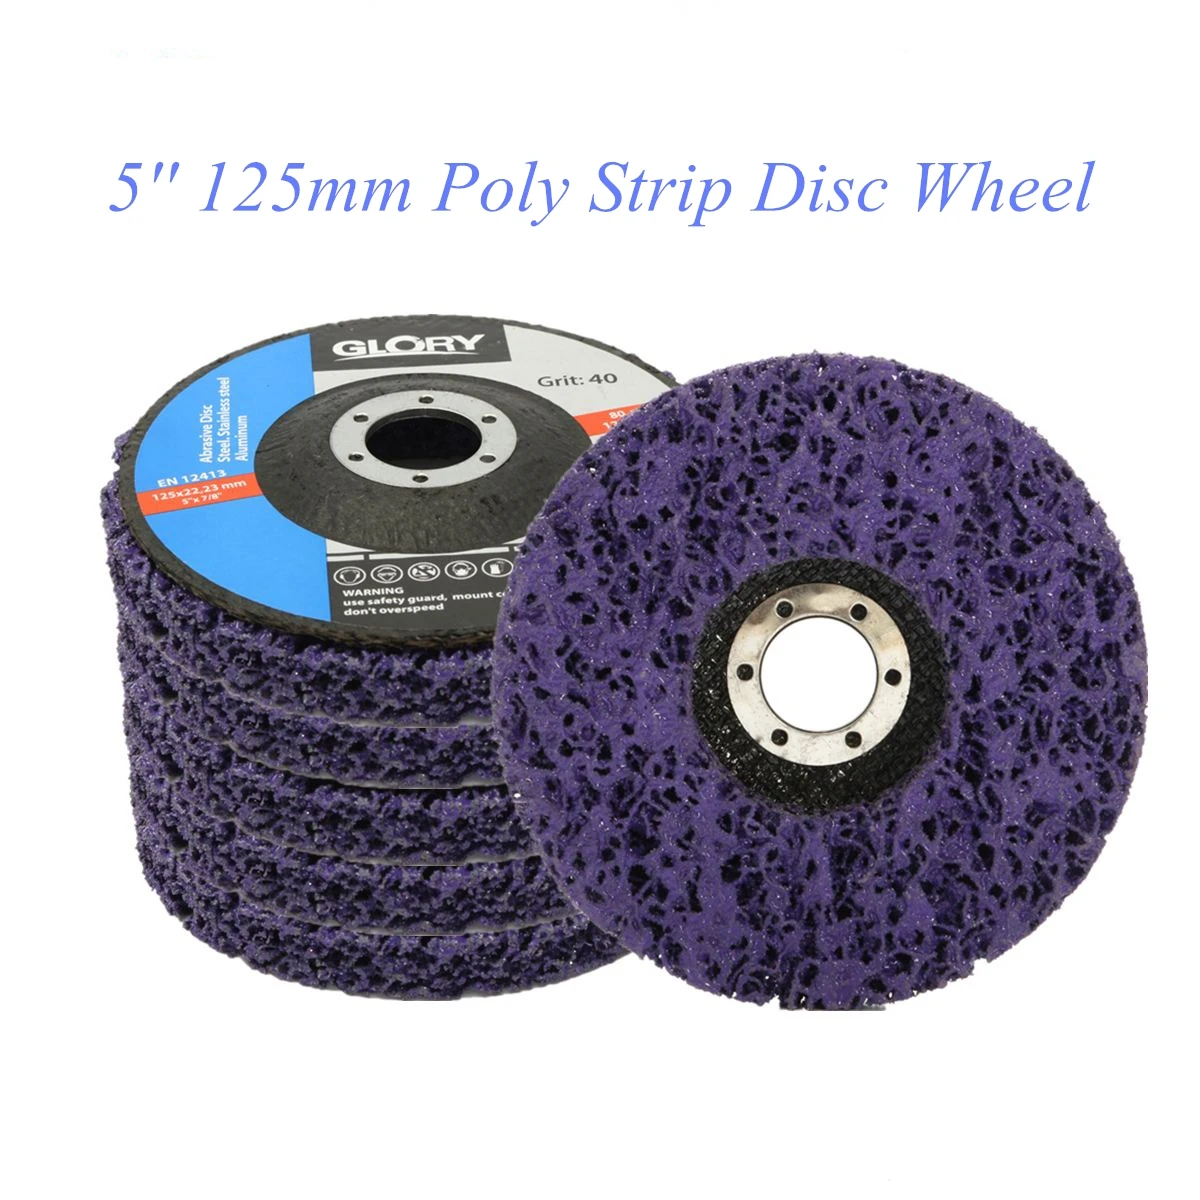 2pcs/set 125mm Poly Strip Disc Abrasive Wheel Paint Rust Removal Clean For Angle Grinder